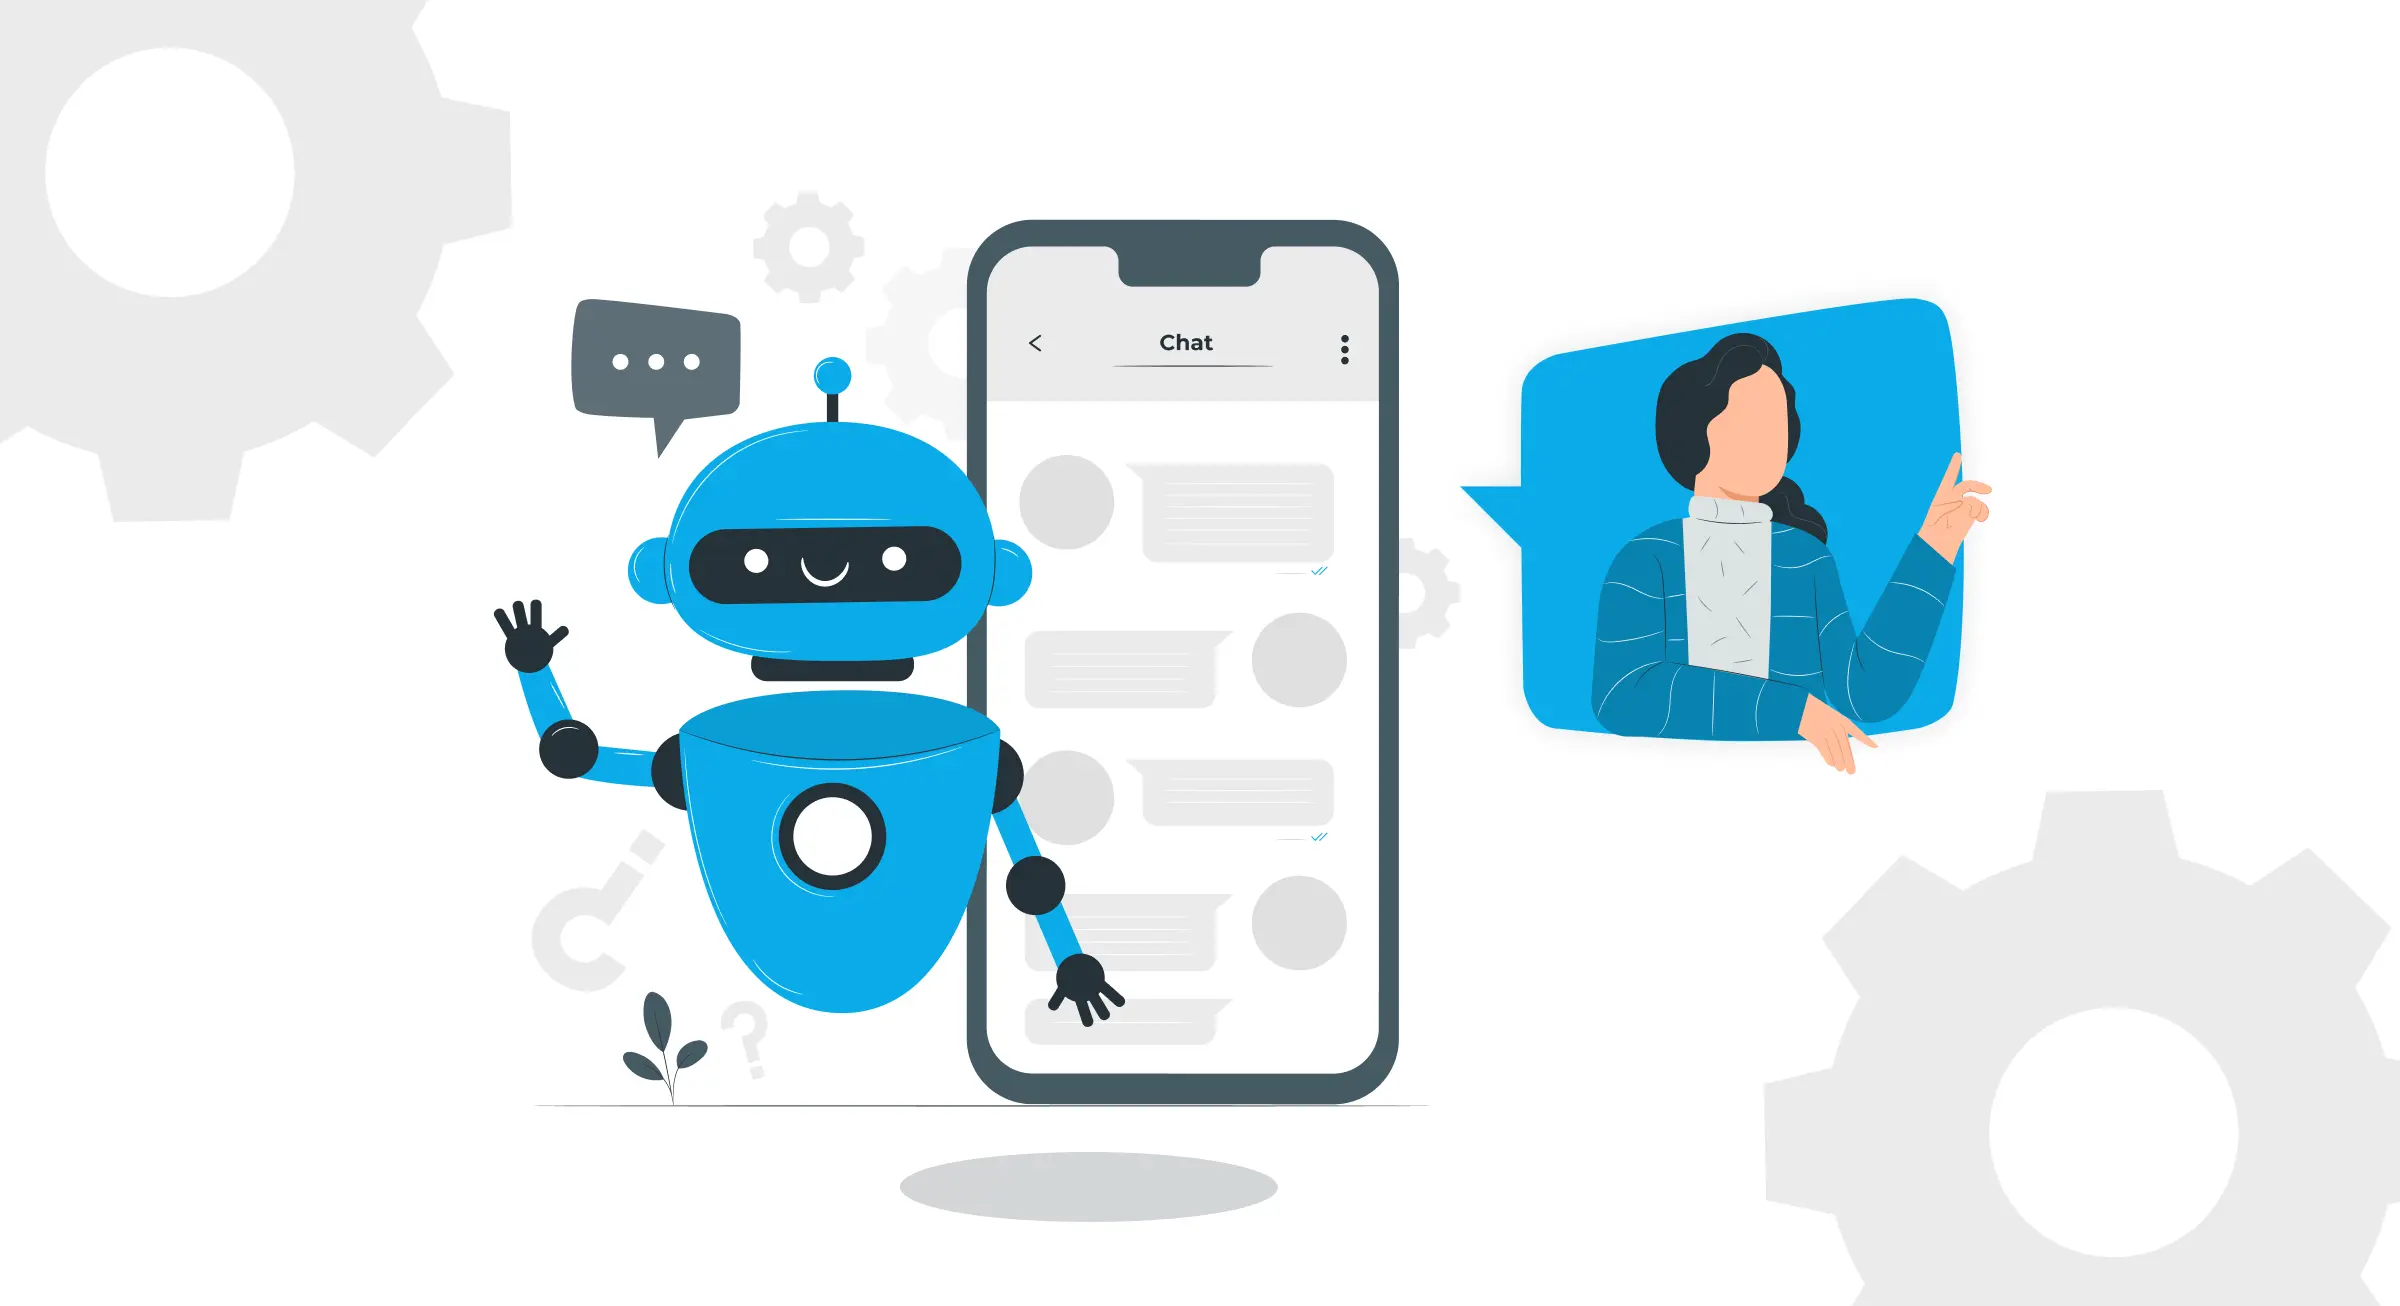 Should hoteliers name their chatbots?